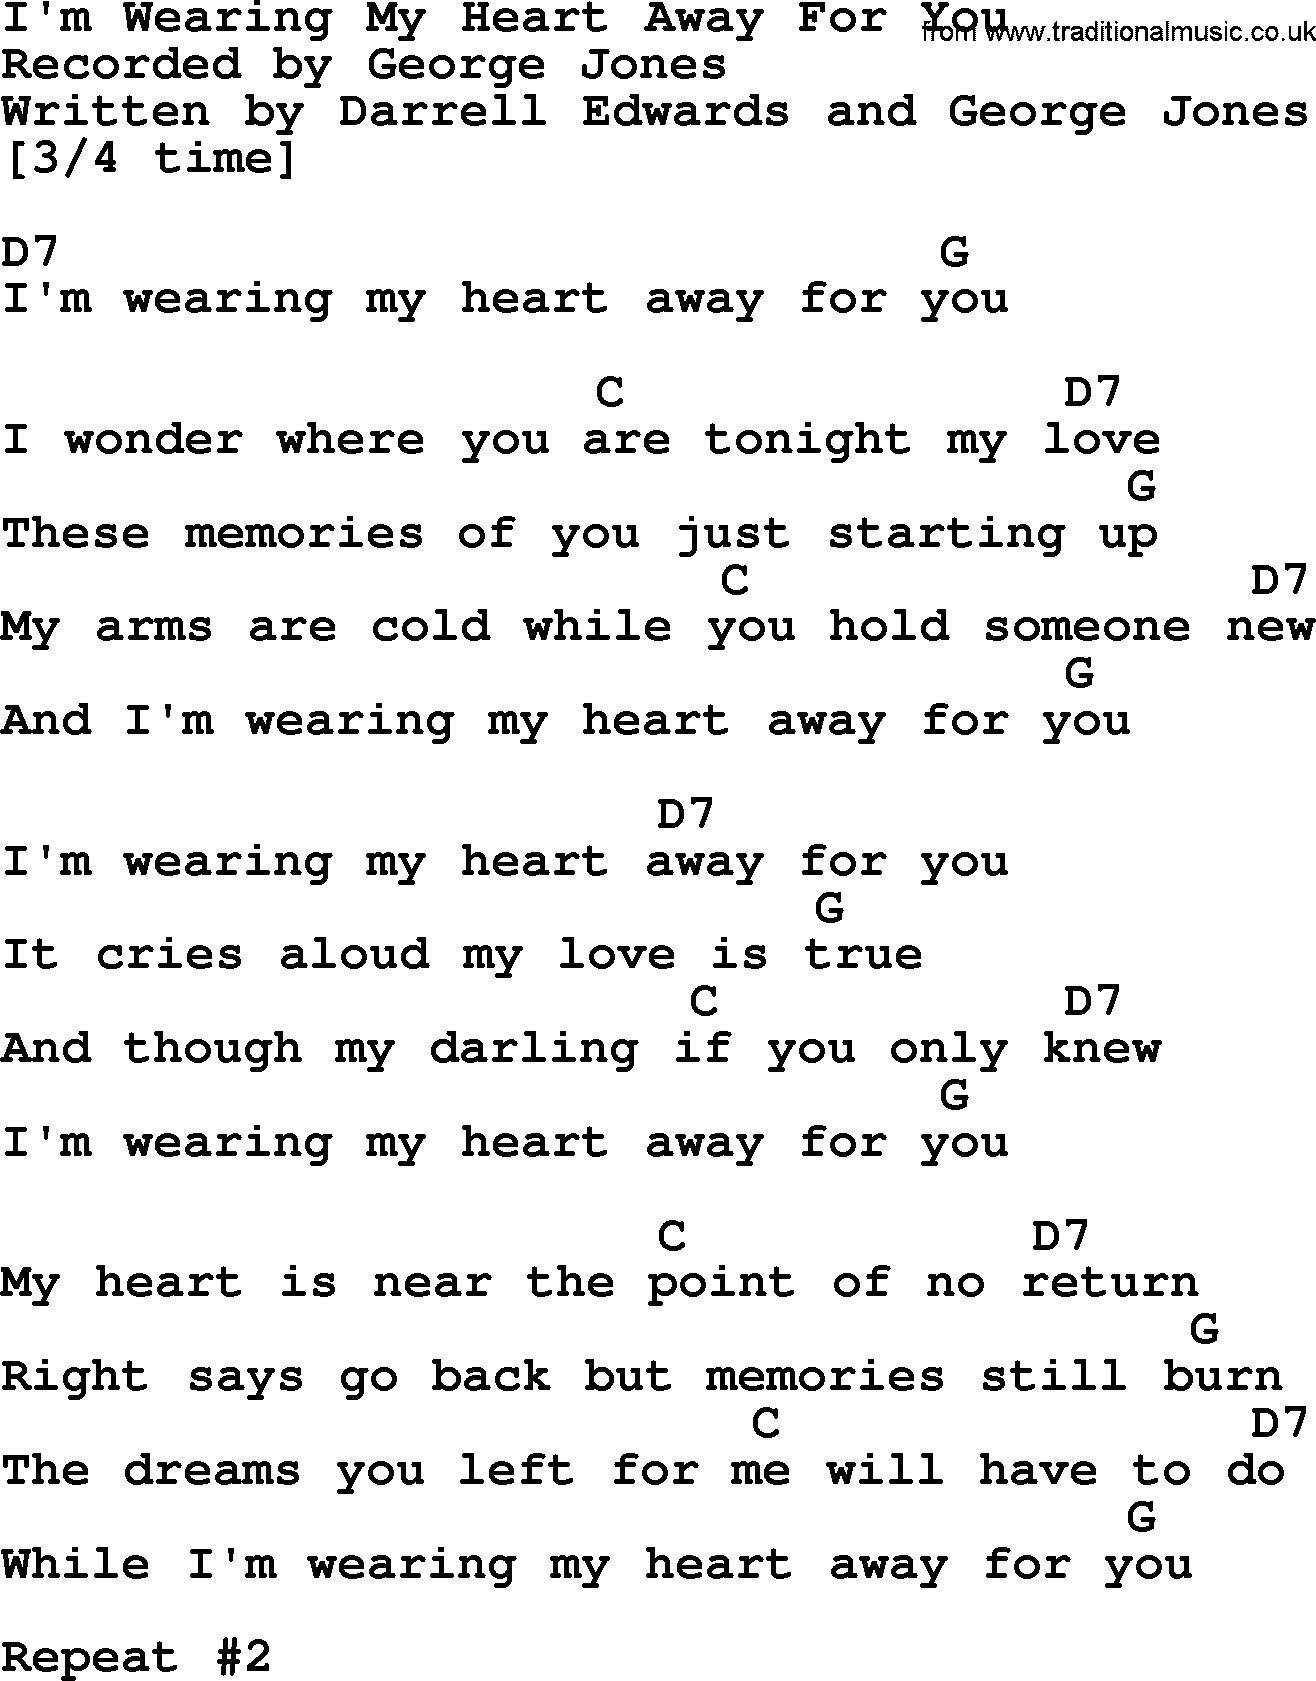 George Jones song: I'm Wearing My Heart Away For You, lyrics and chords